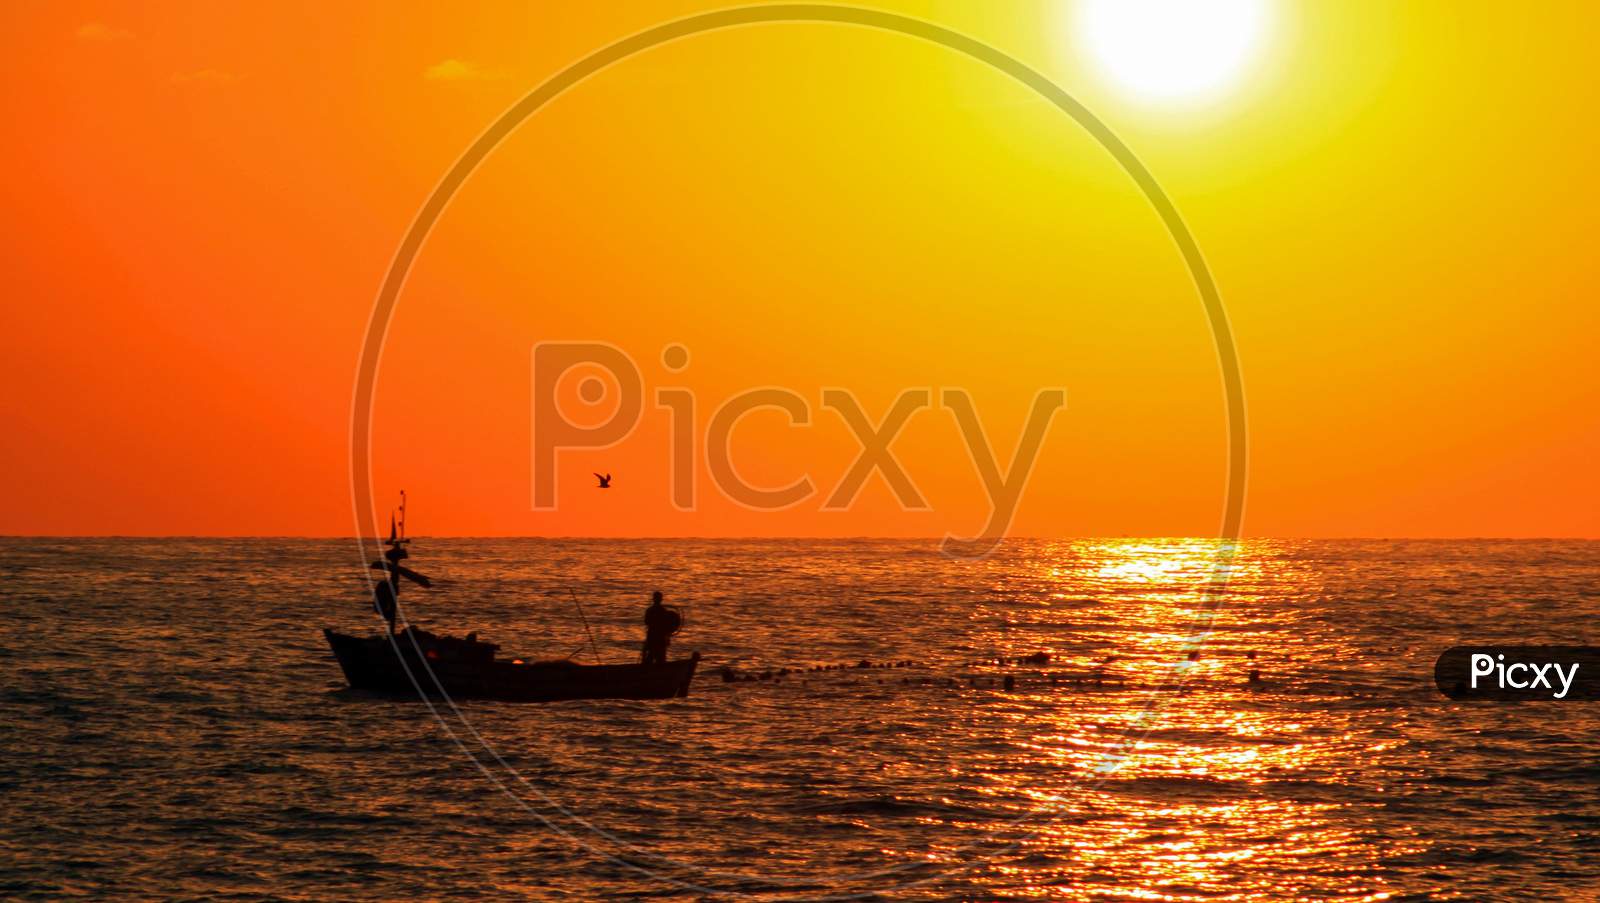 Fisherman In Boat On The Sea Before Sunset